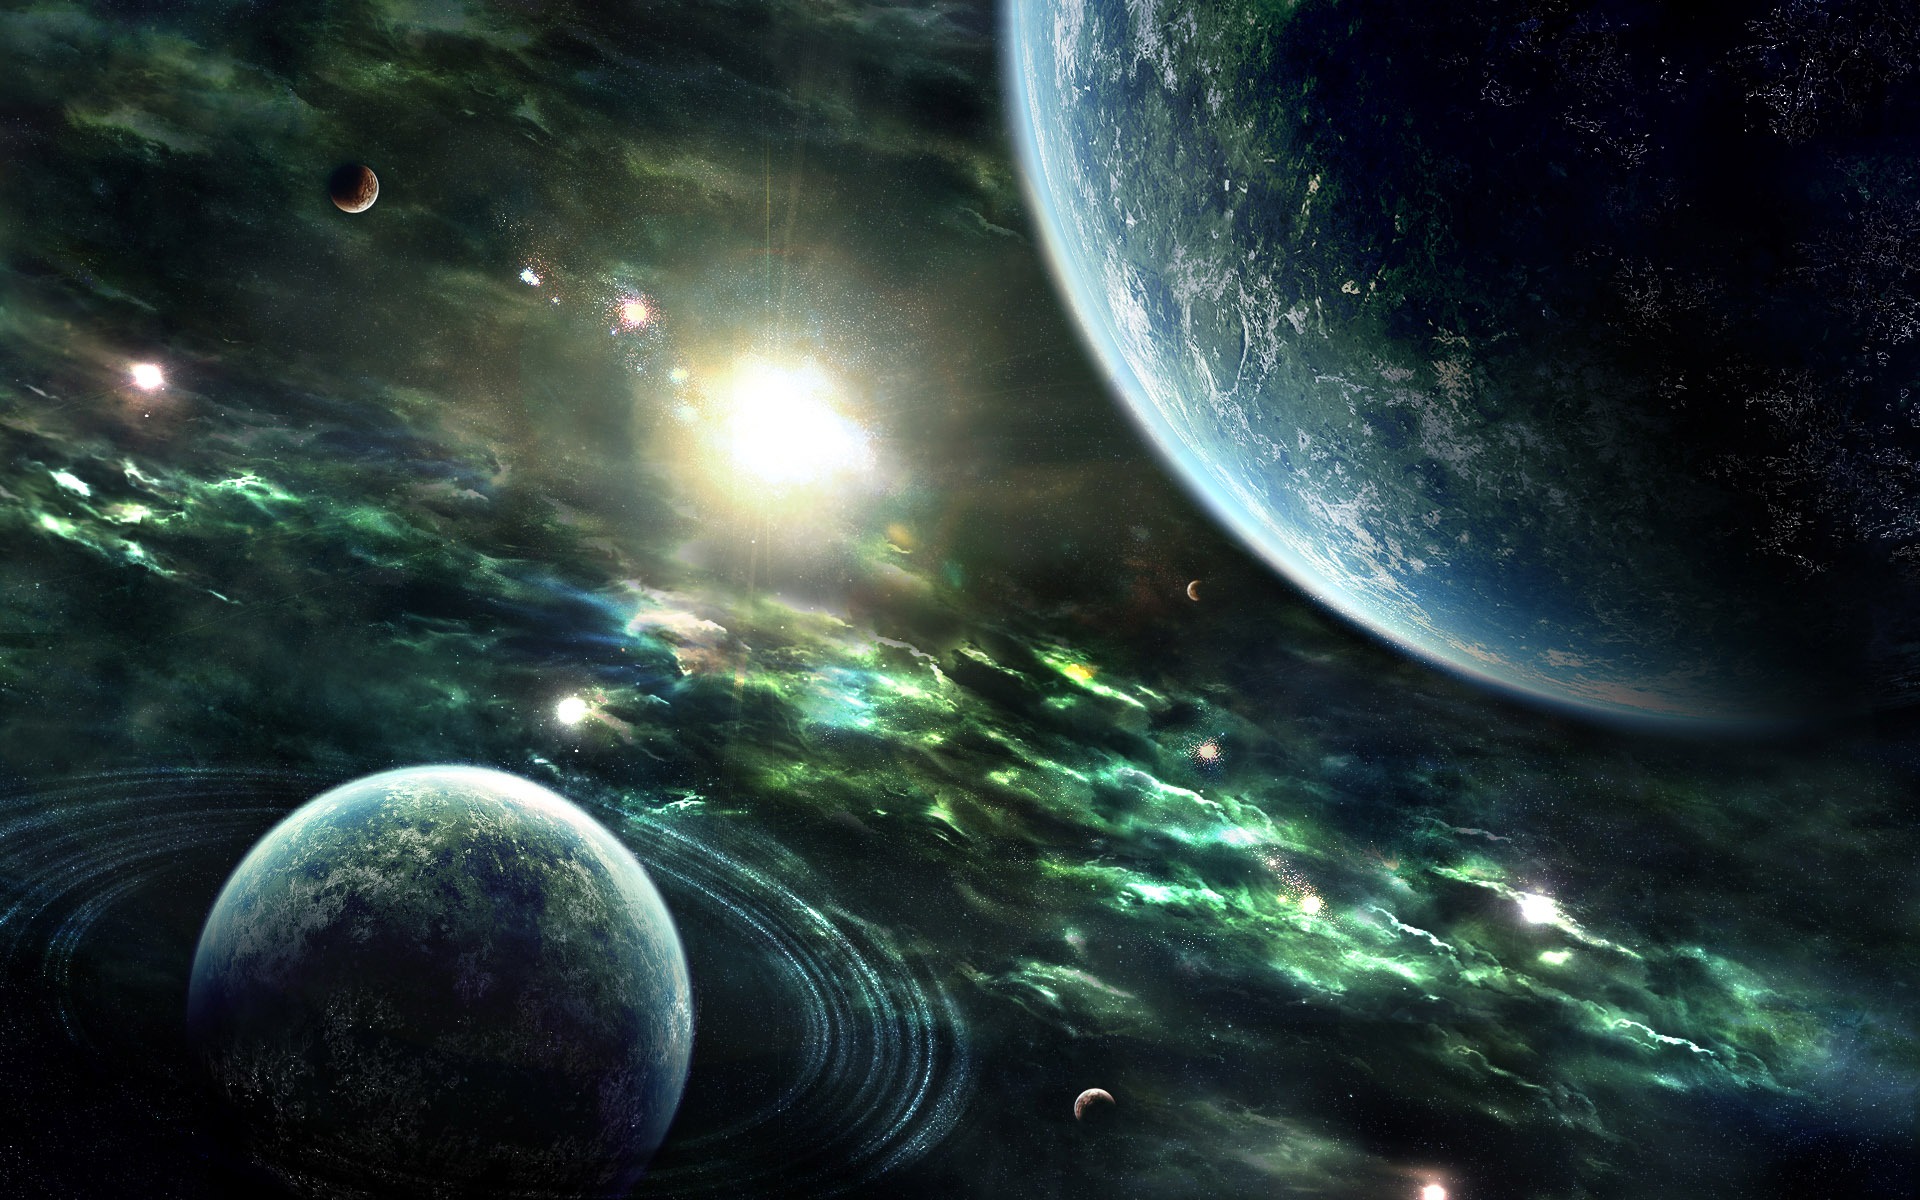 Star Earth HD Wallpapers #8 - 1920x1200